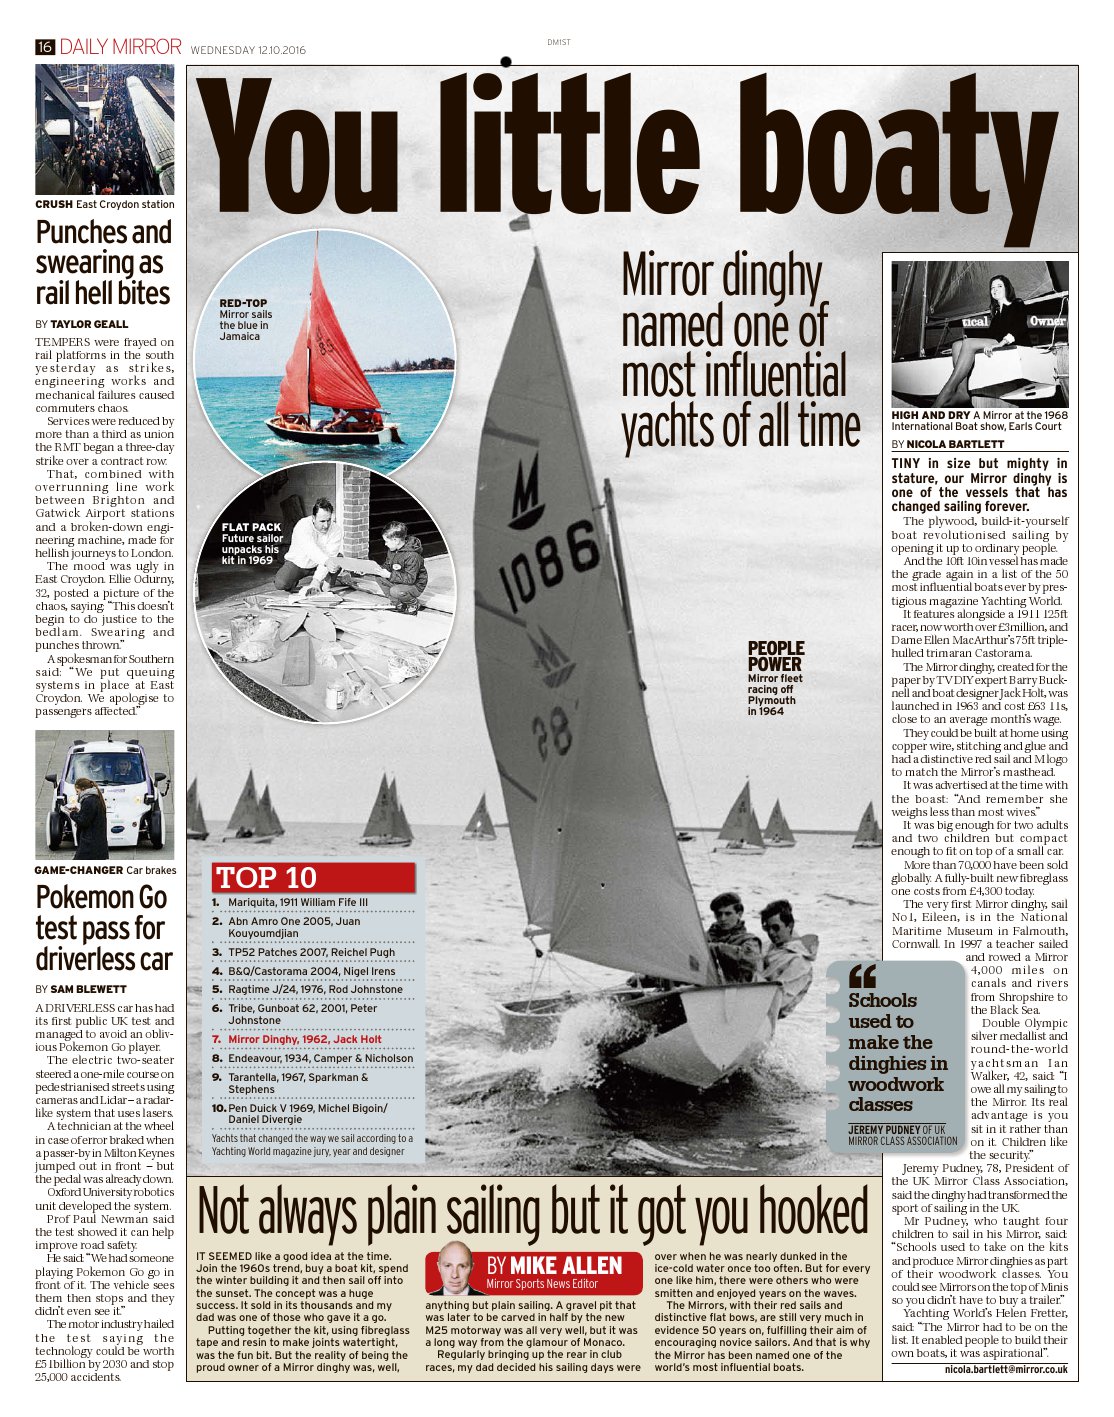 Page 16 of the Daily Mirror with article and photos of the Mirror Dinghy